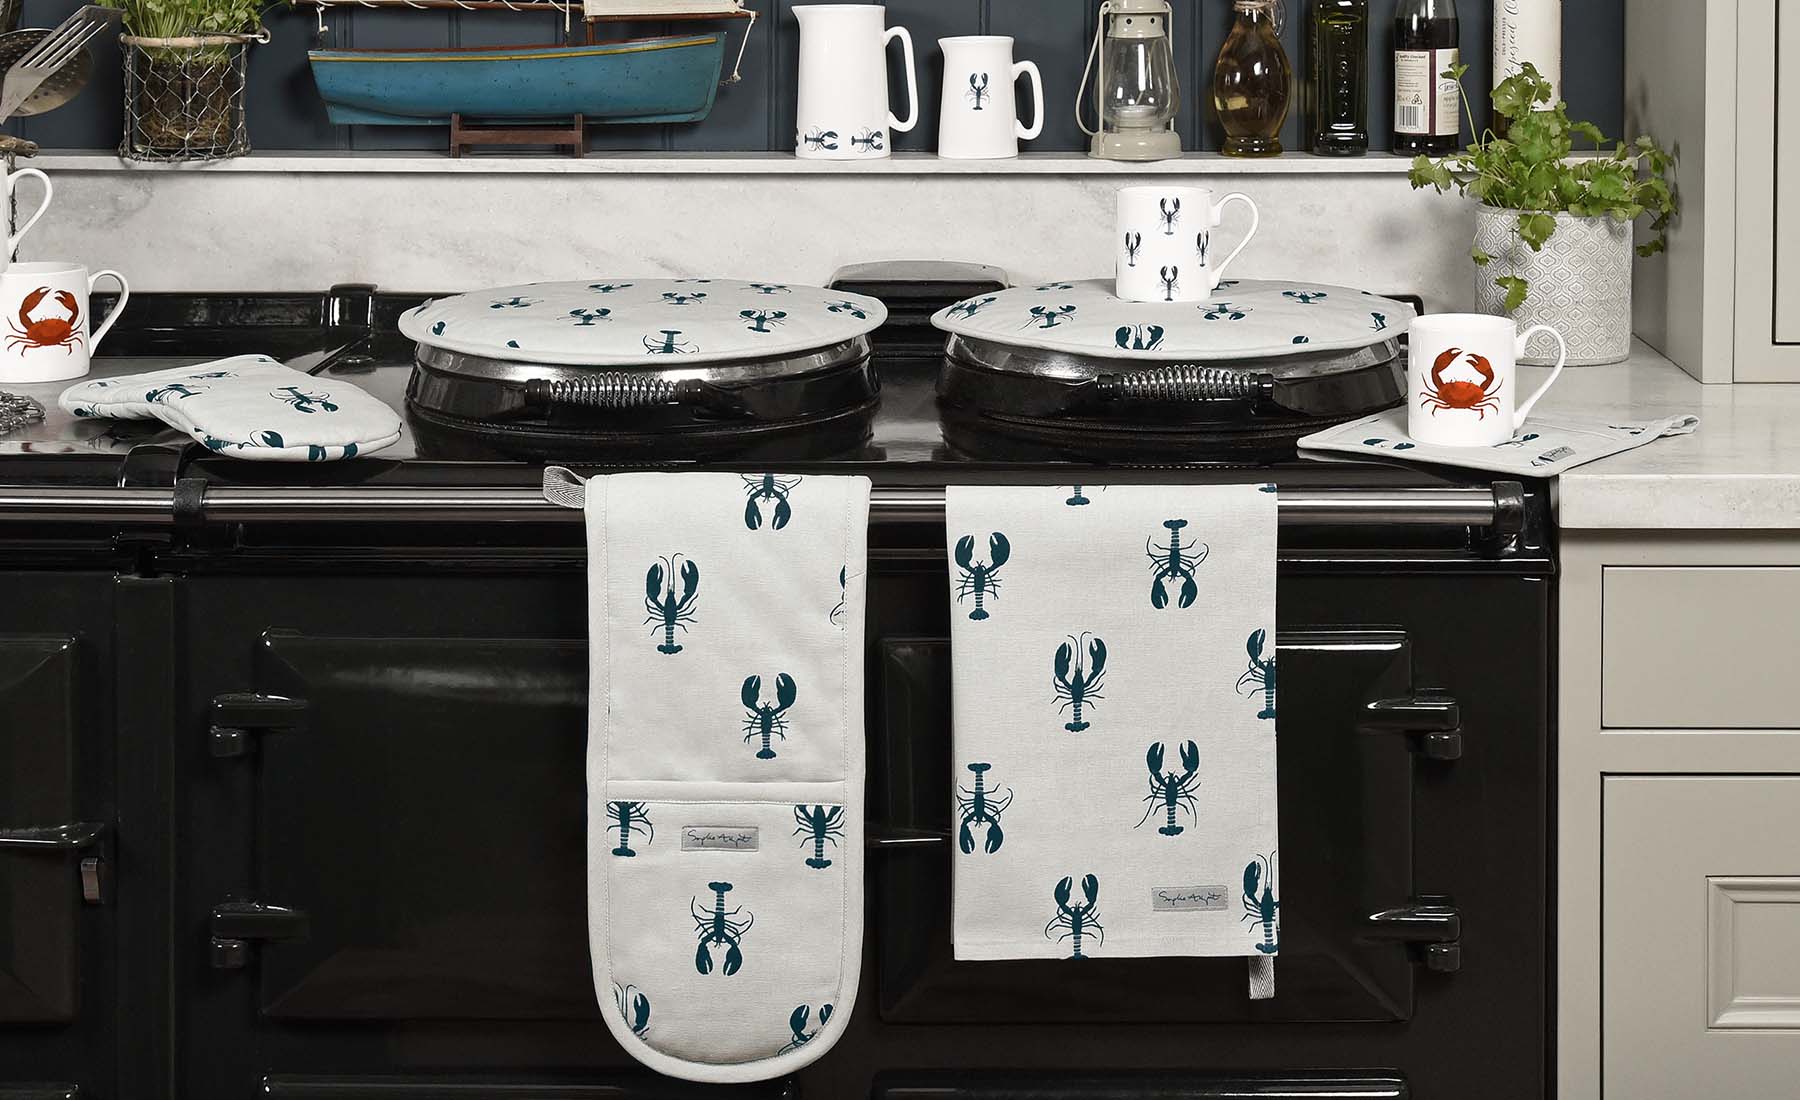 Lobster & Crab Home Accessories